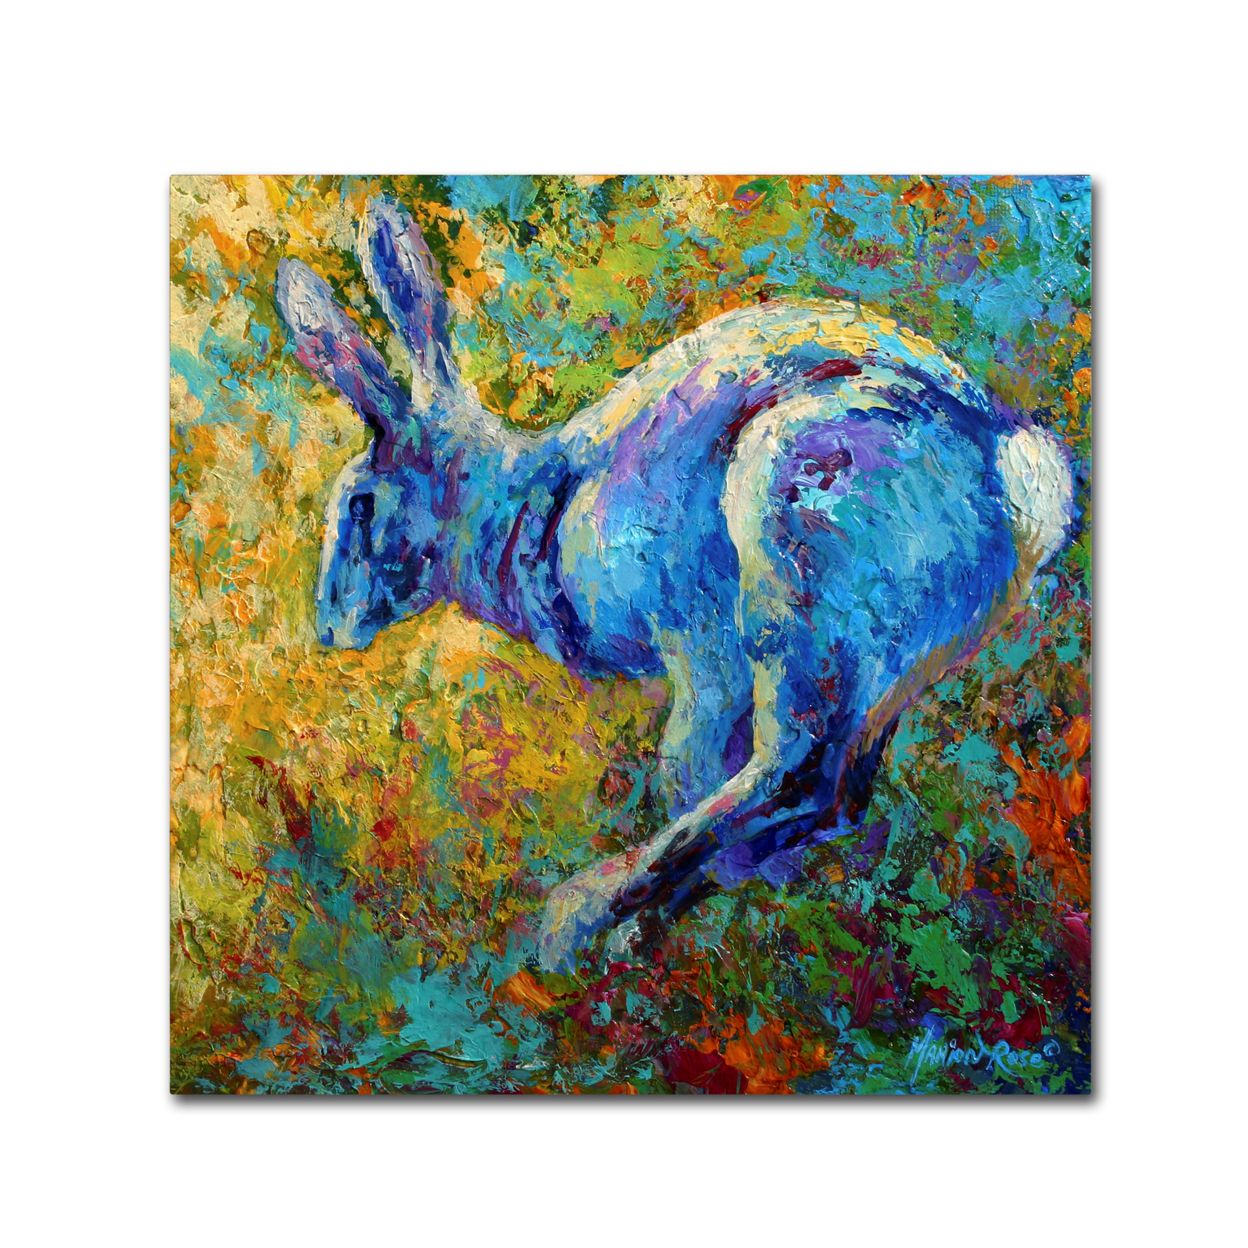 Marion Rose 'Hare' Ready To Hang Canvas Art 24 X 24 Inches Made In USA